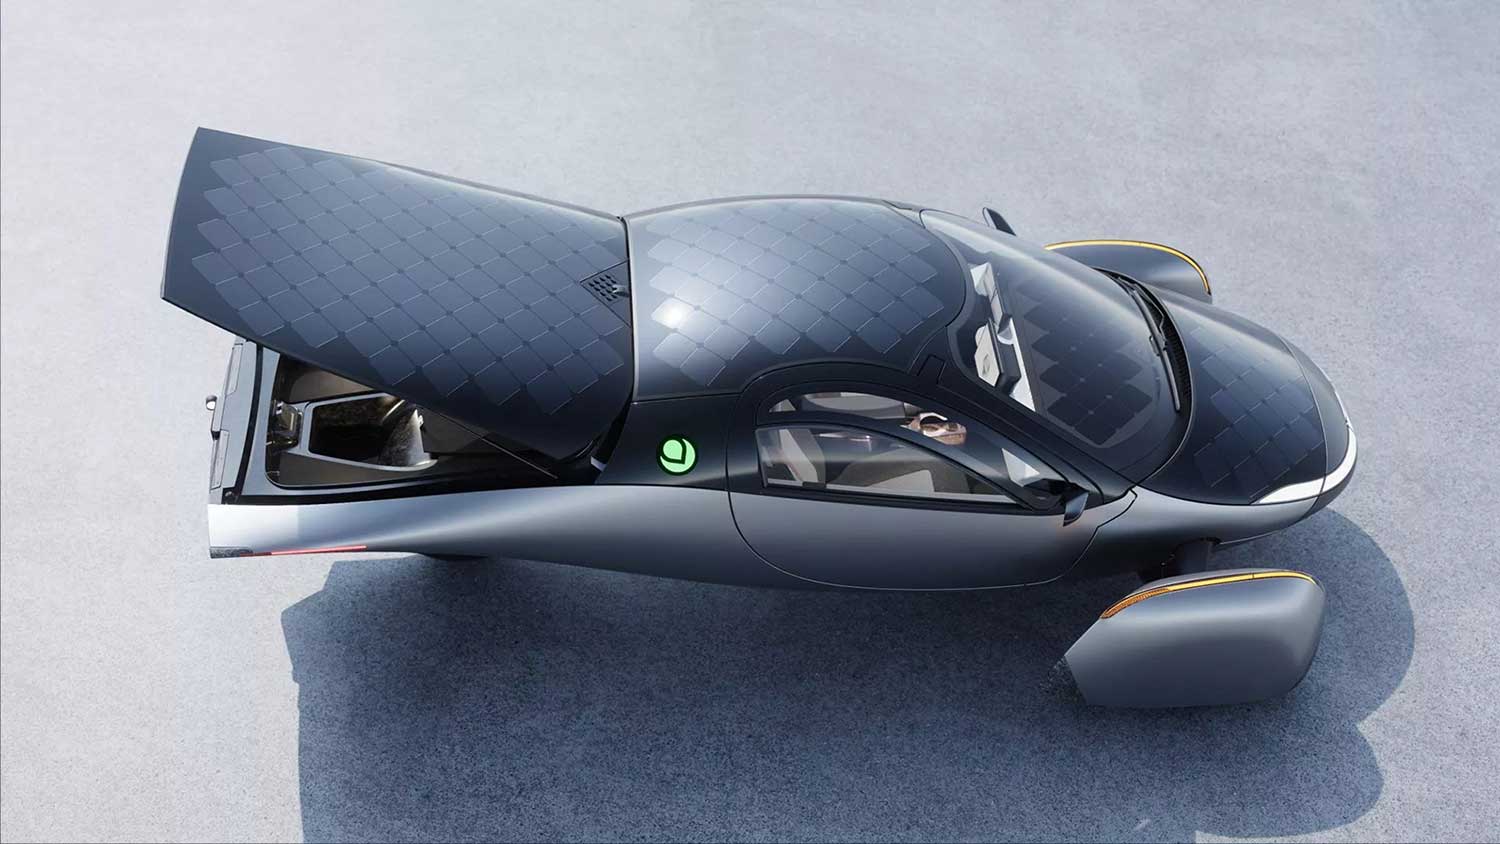 three-wheeled black and silver car see from above with solar panels on the roof